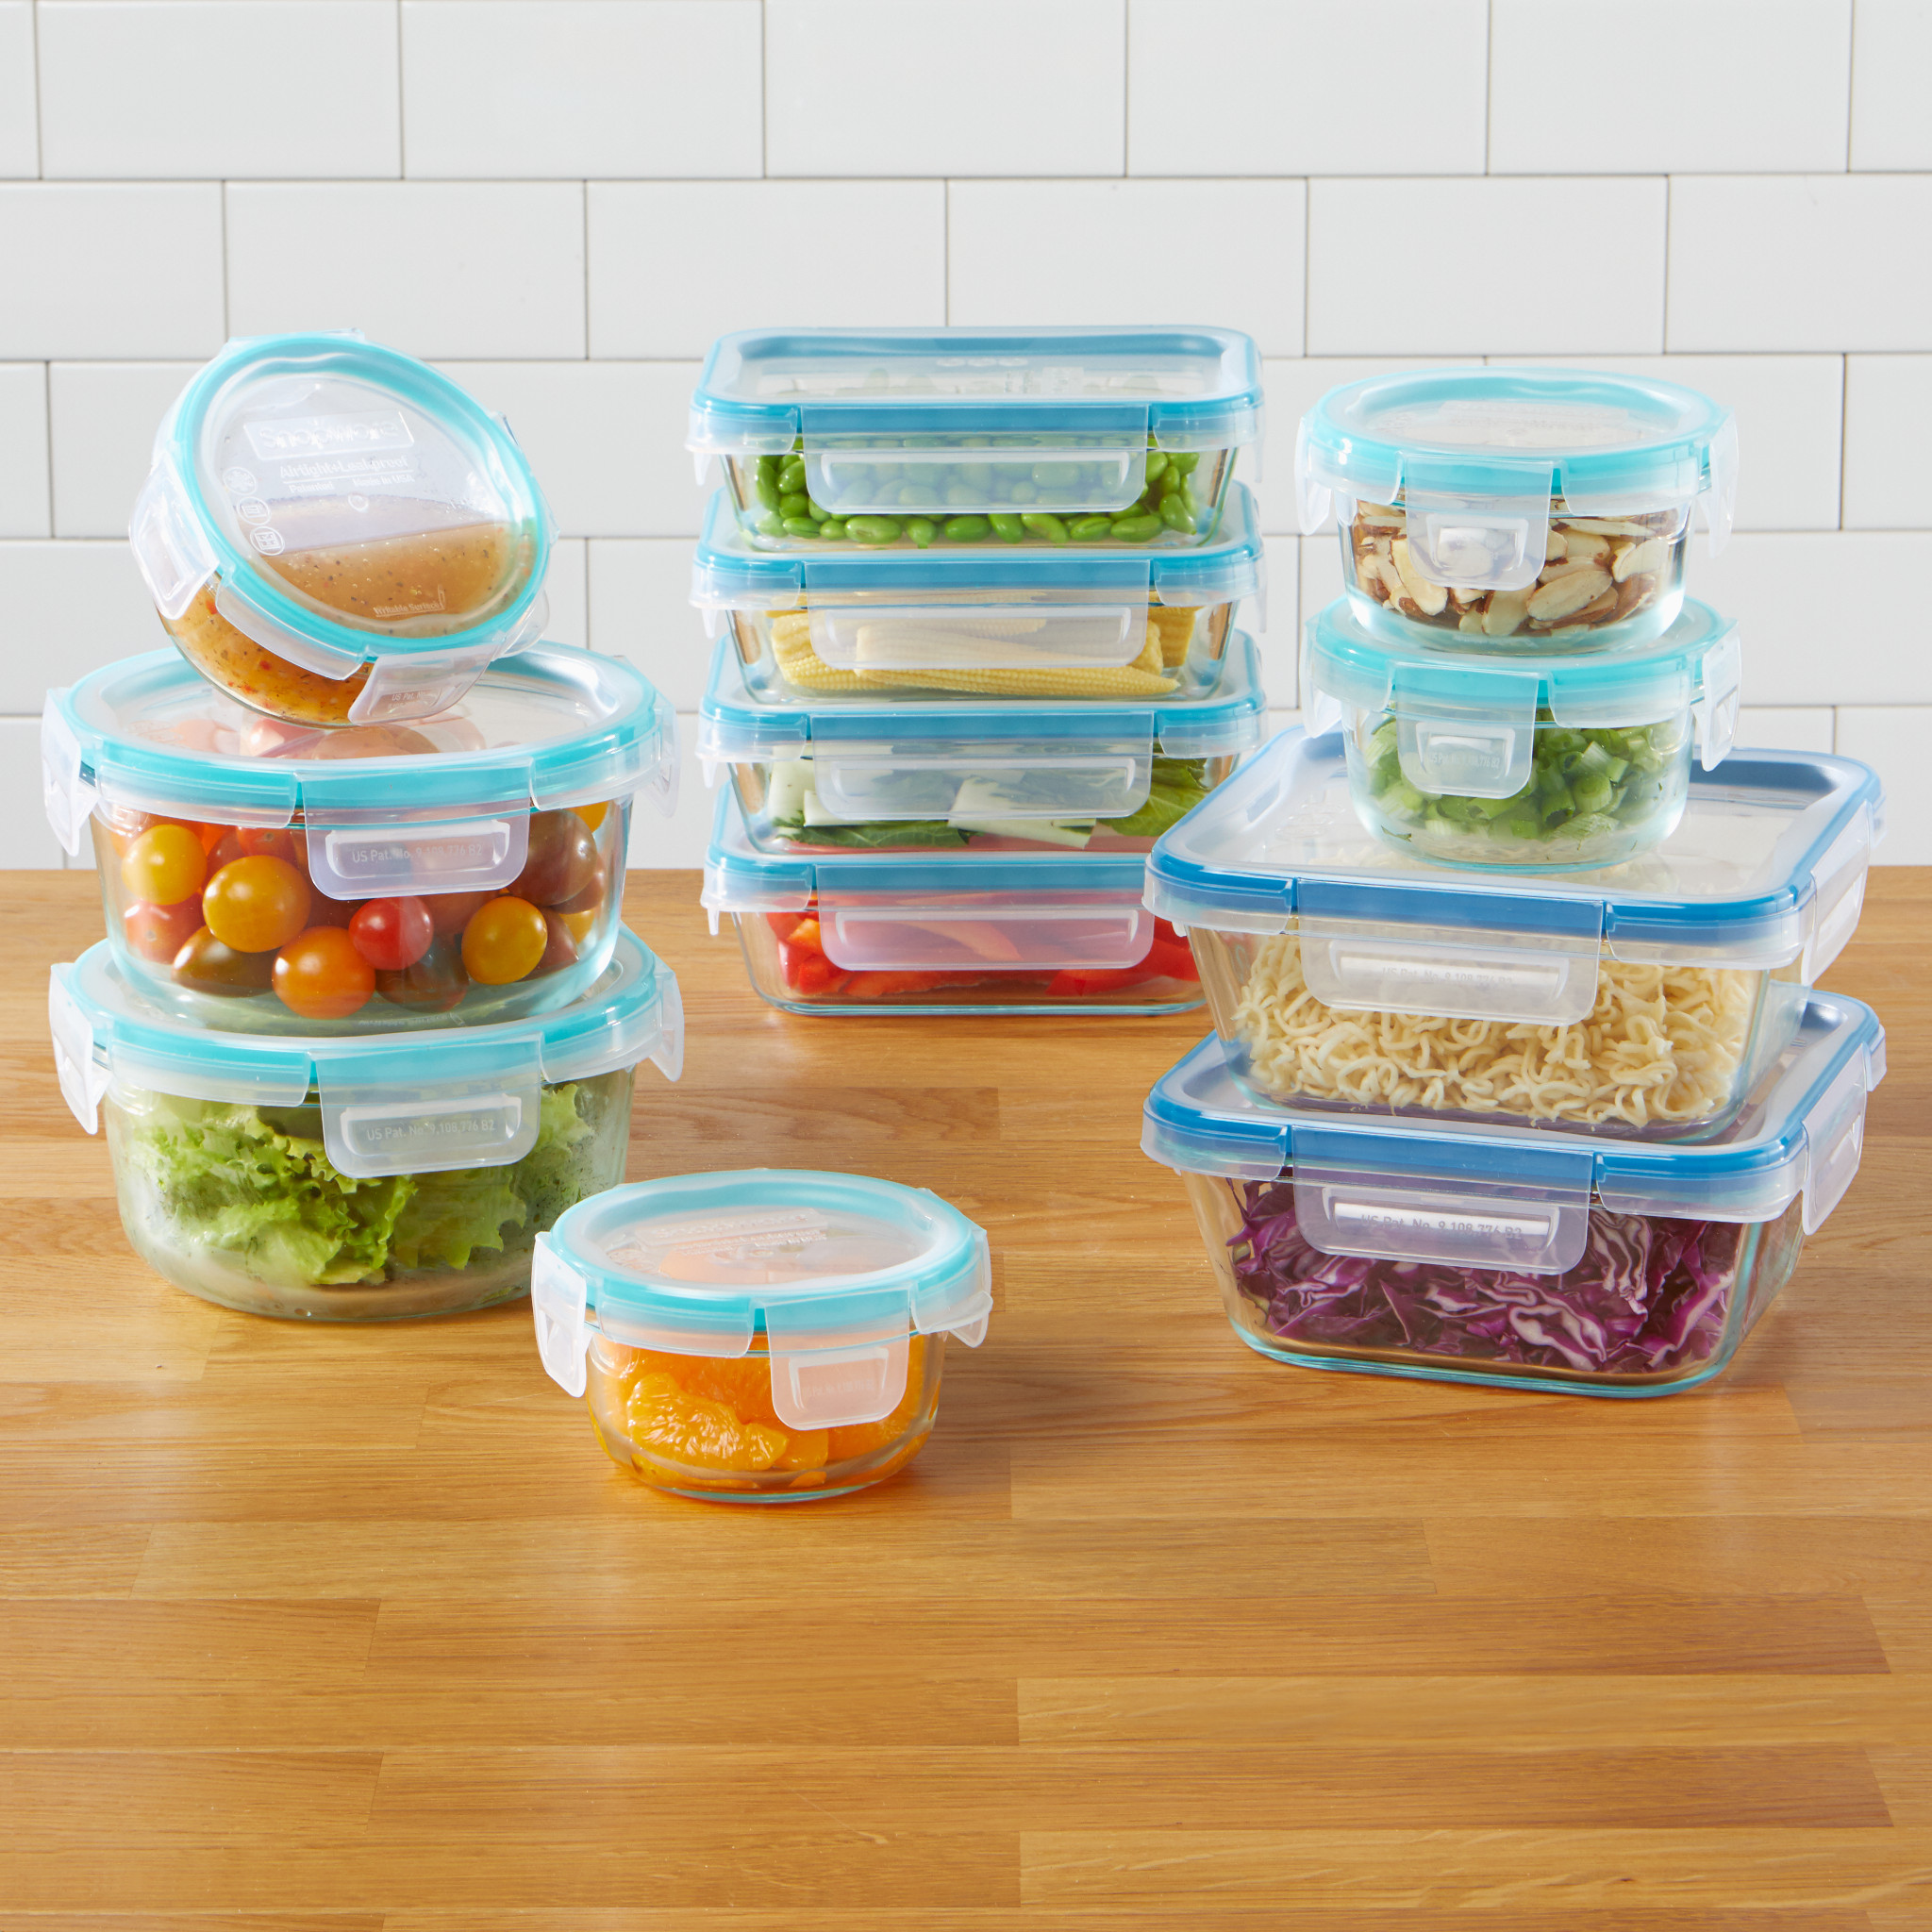 120 Oz 15 Cup Large Glass Food Storage Containers with Lids